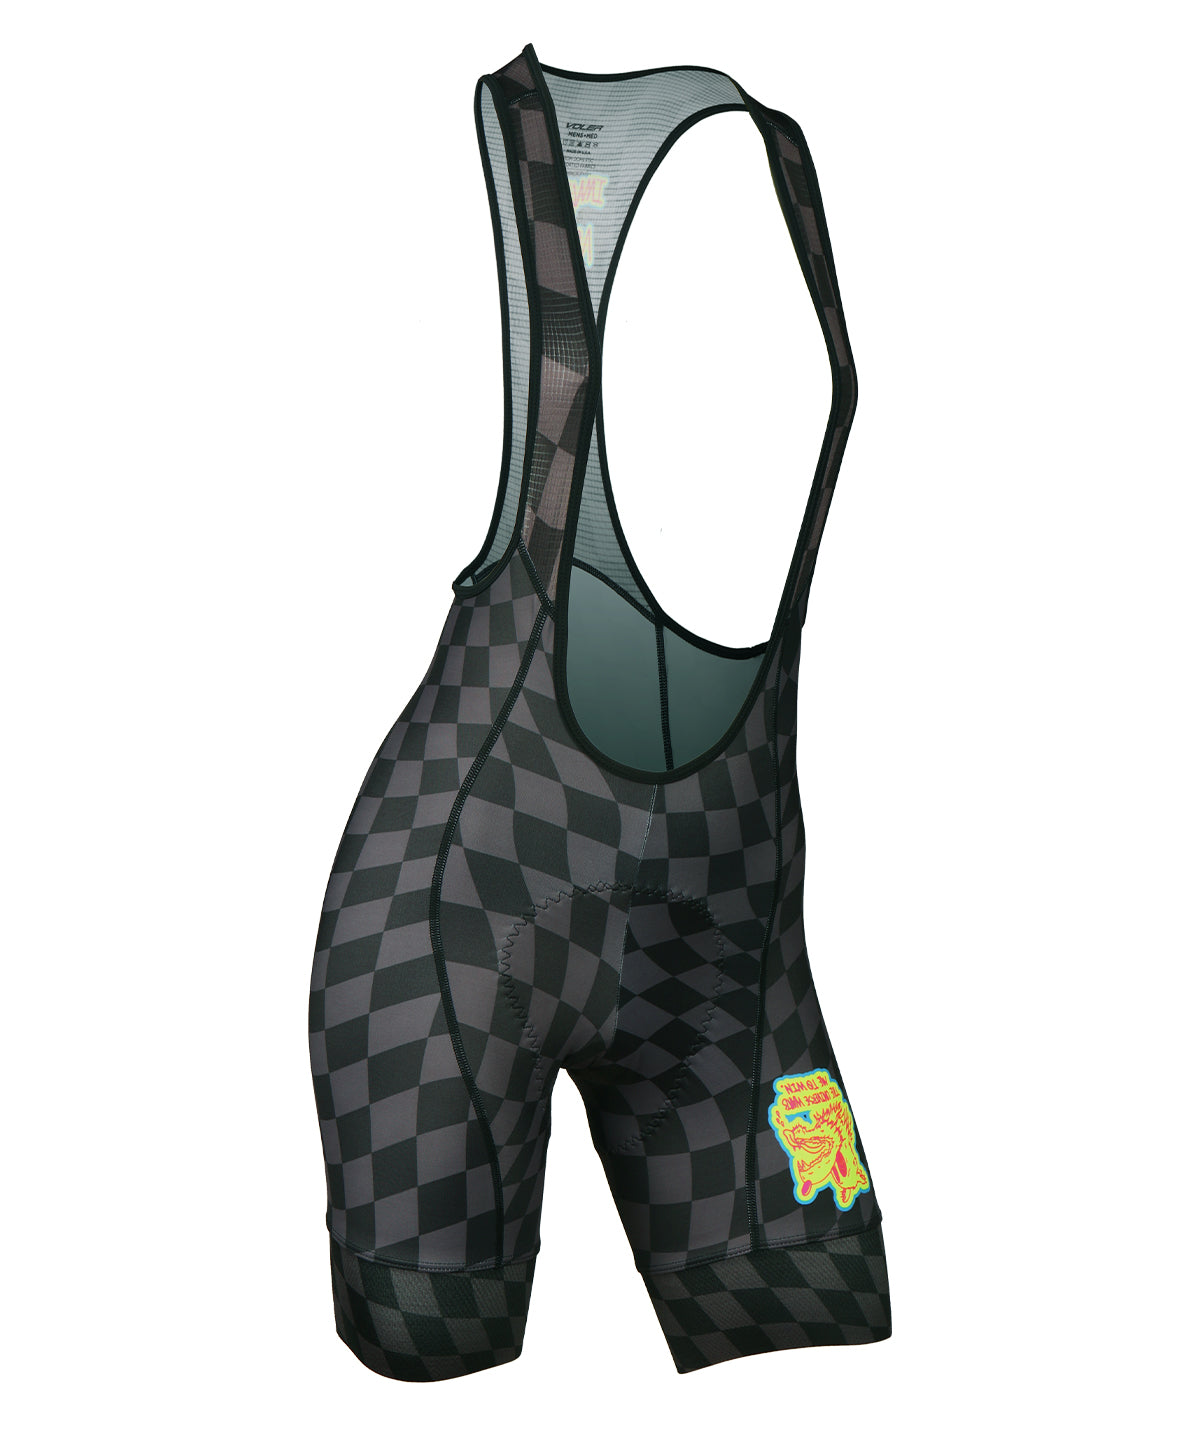 W. PACE BIB SHORT - IMAGINARY COLLECTIVE